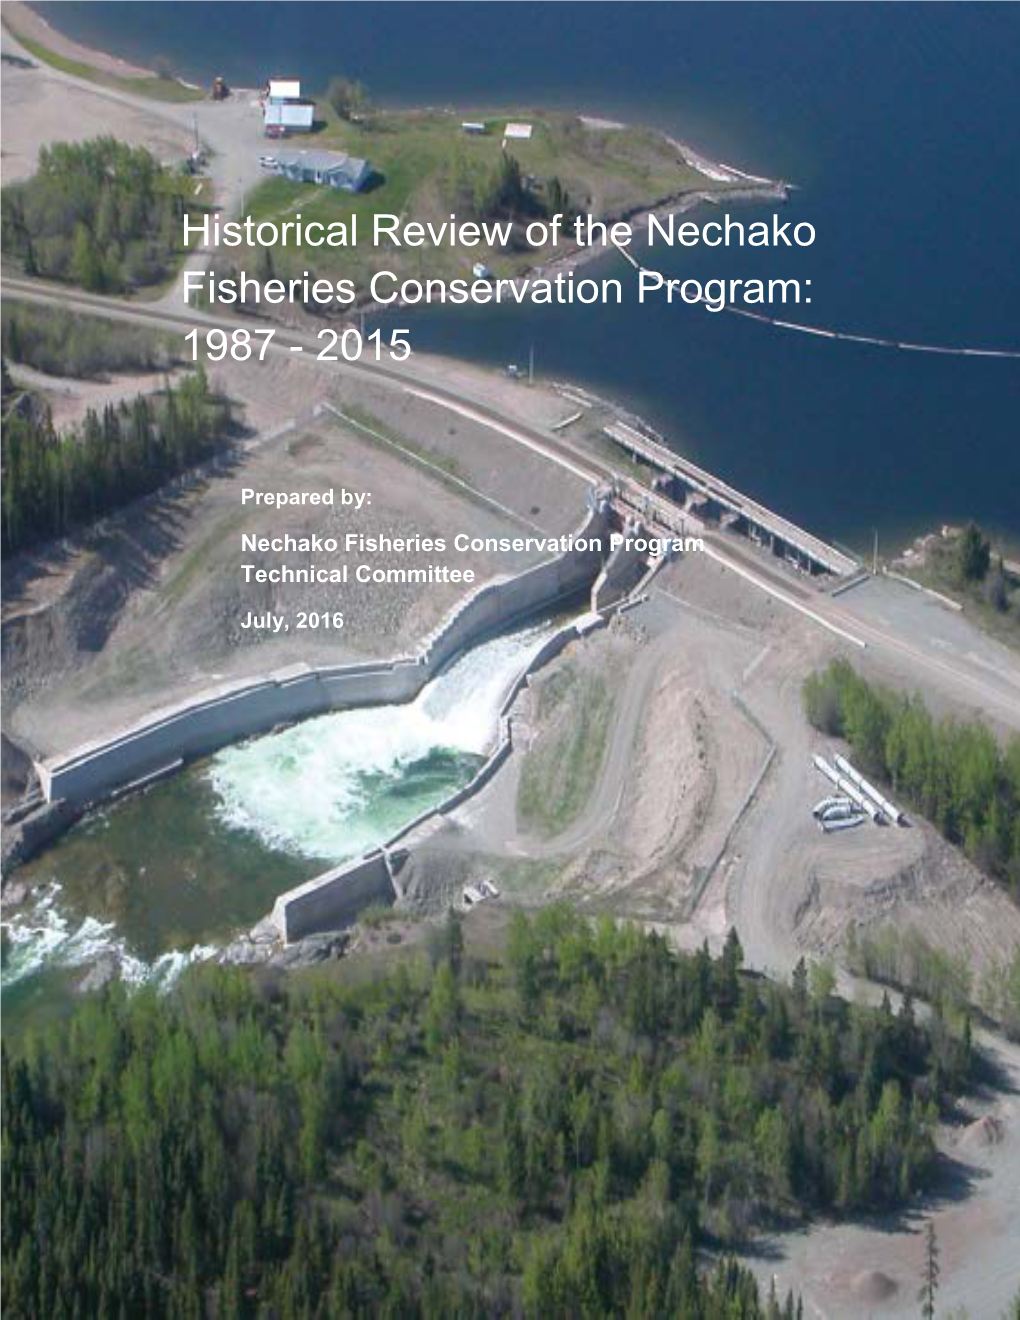 Historical Review of the Nechako Fisheries Conservation Program: 1987 - 2015